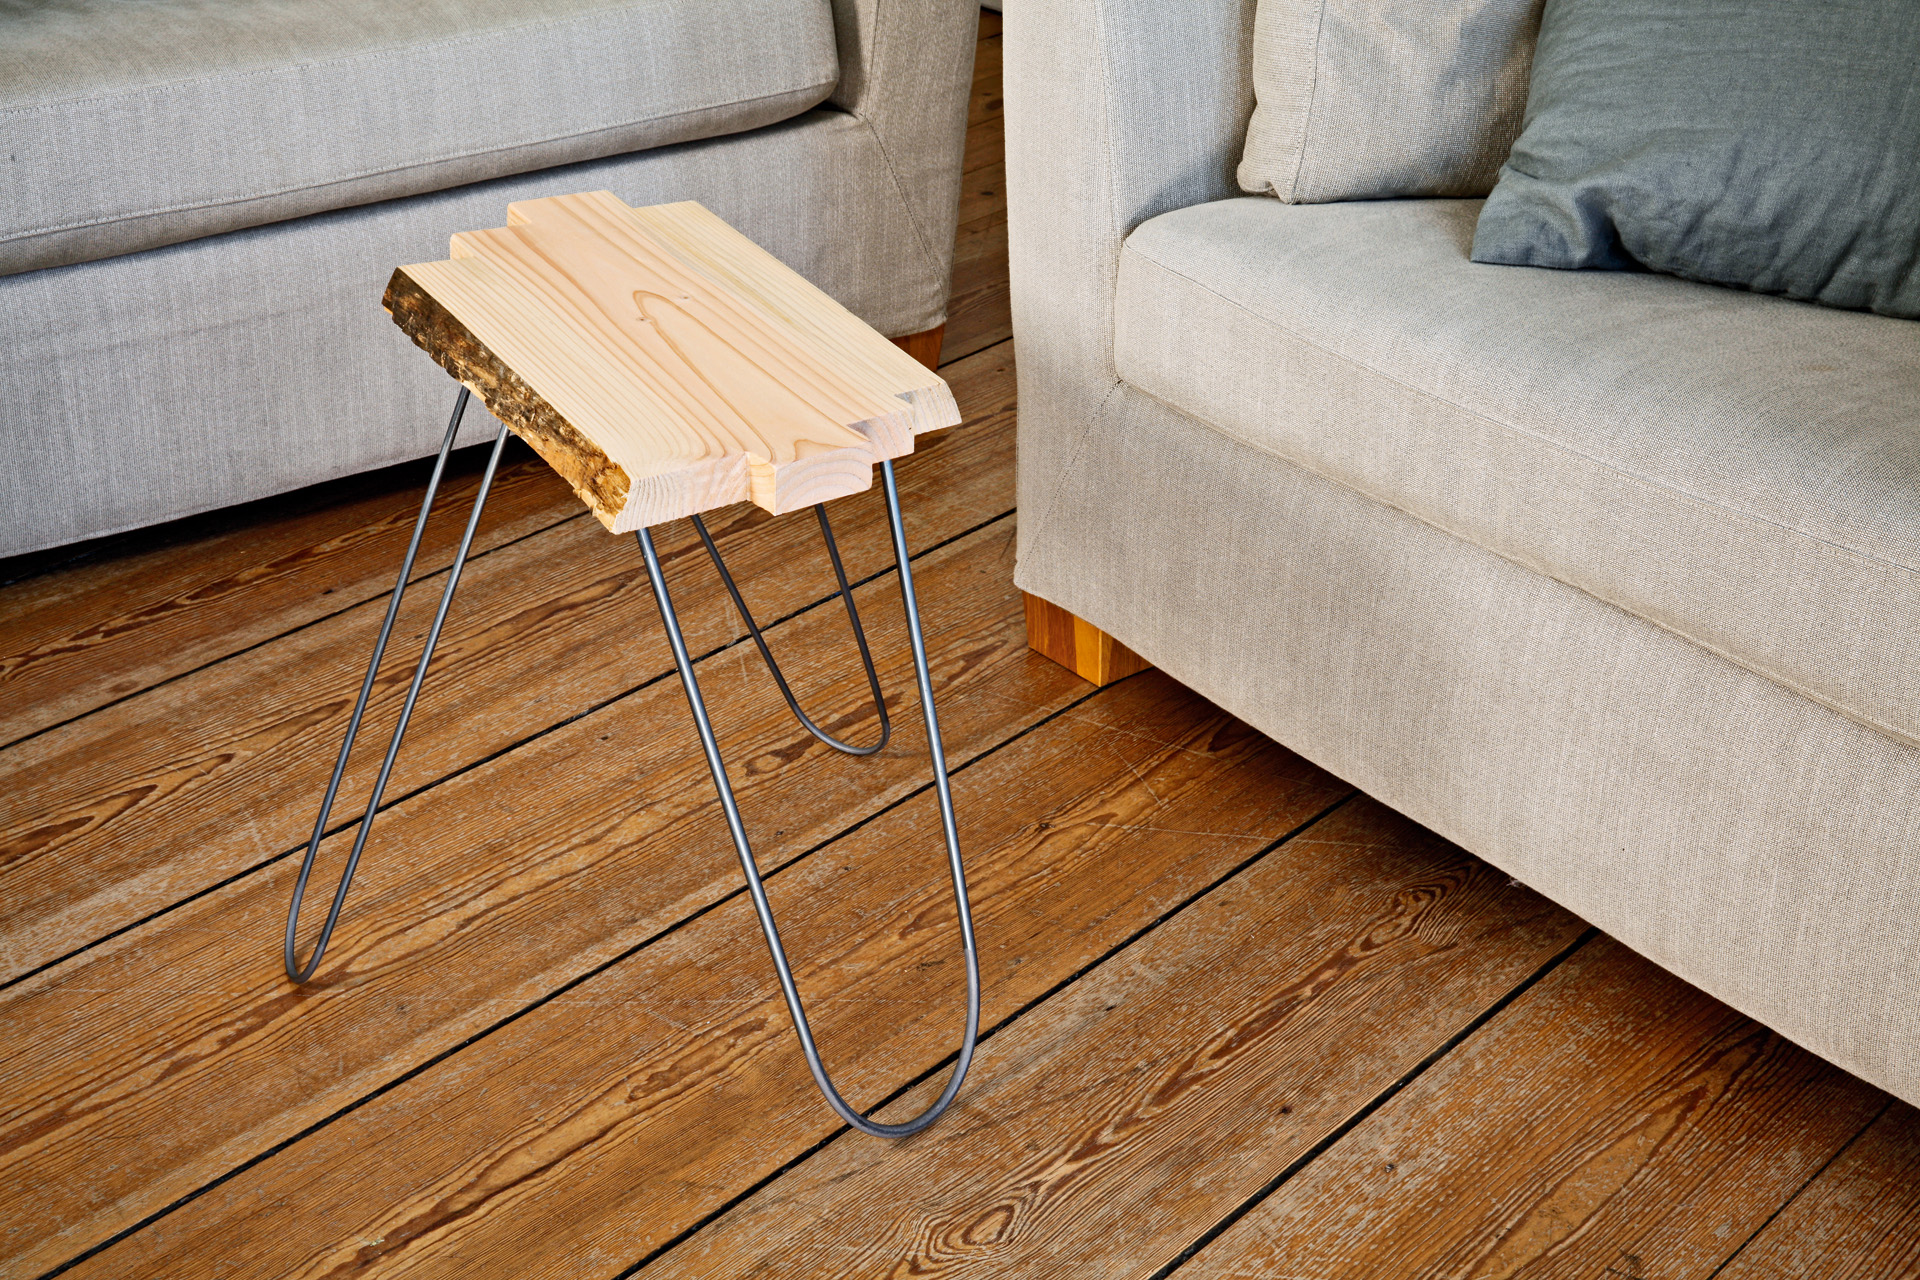 A DIY side table in a living room